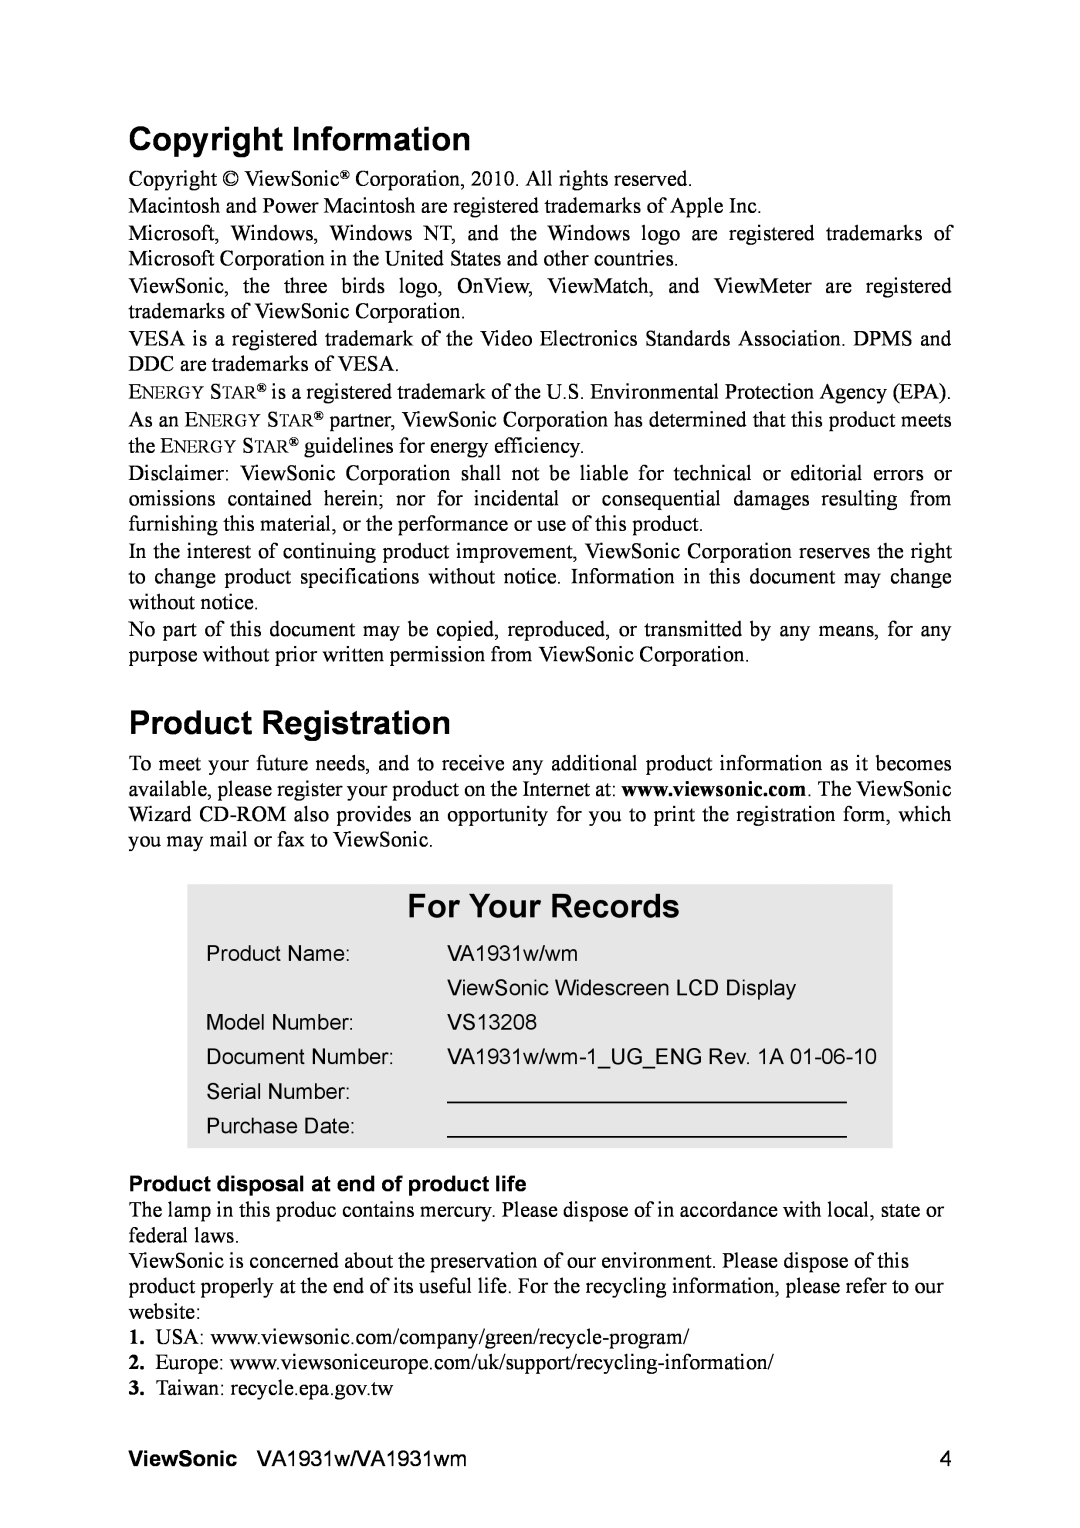 ViewSonic VA1931WM Copyright Information, Product Registration, For Your Records, Product disposal at end of product life 